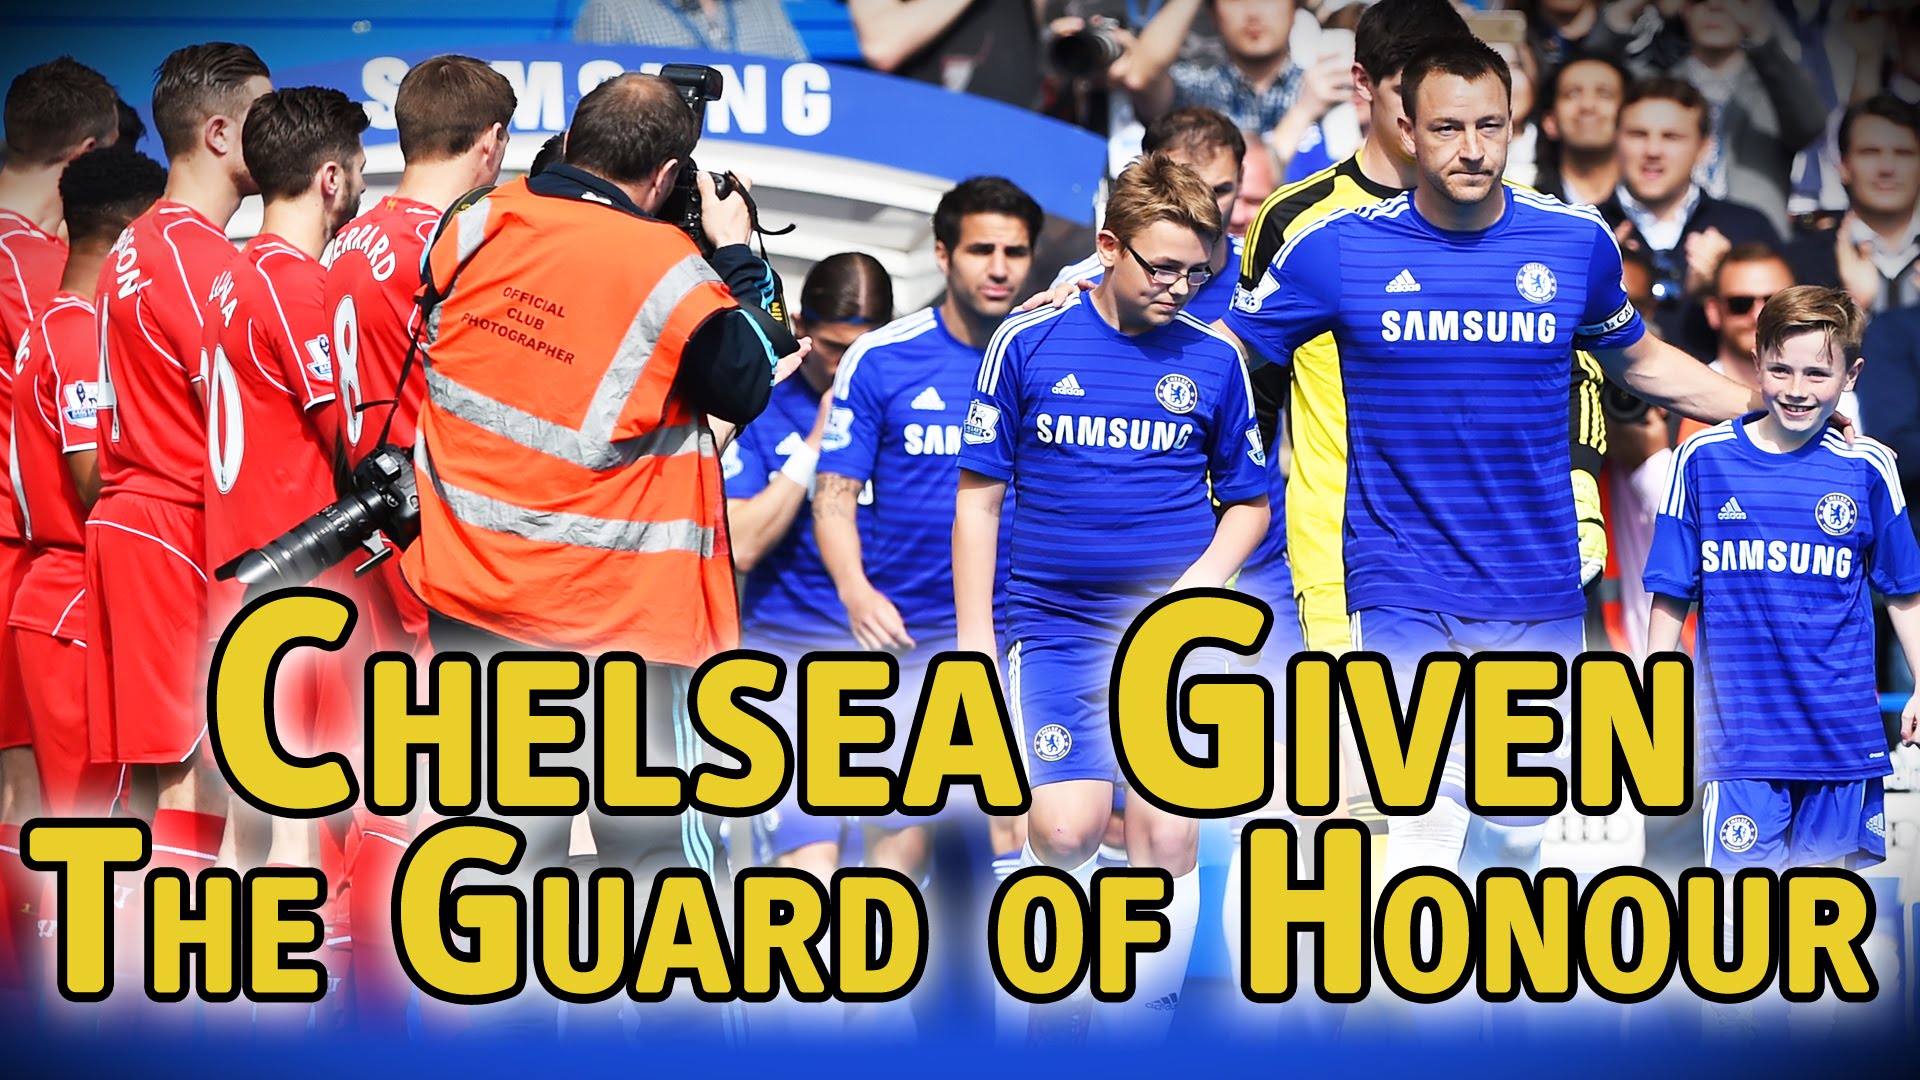 Liverpool give Chelsea the guard of honour at Stamford Bridge - YouTube